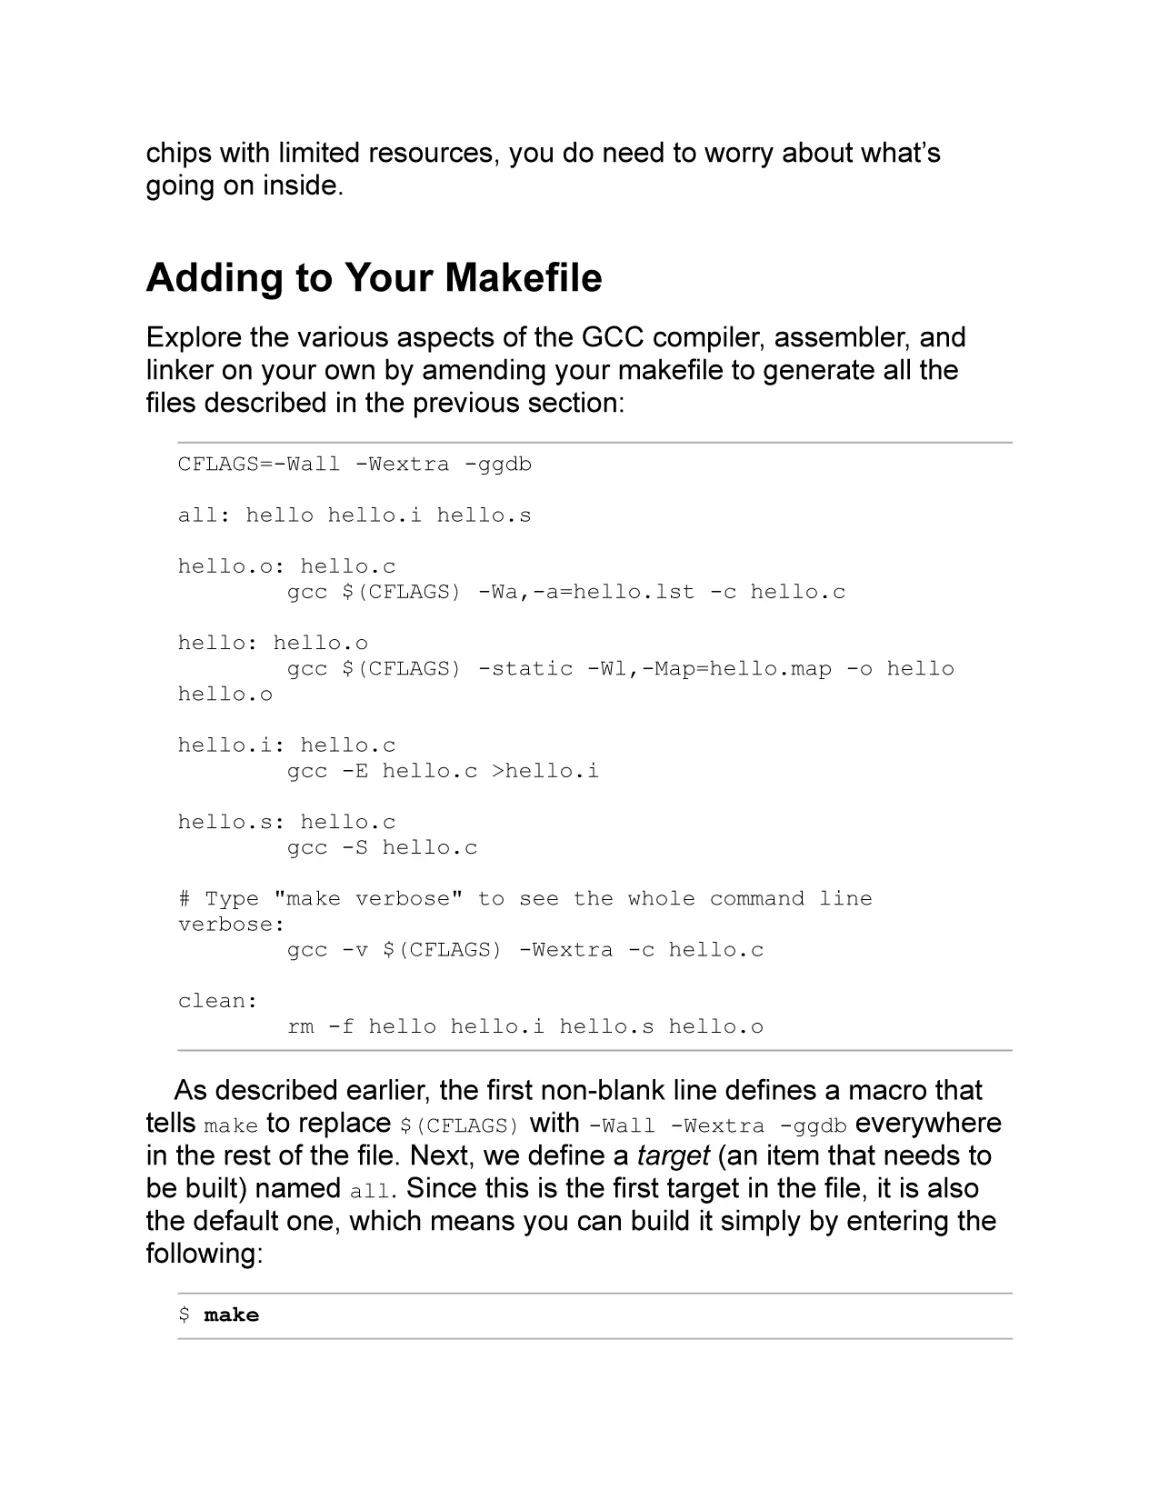 Adding to Your Makefile